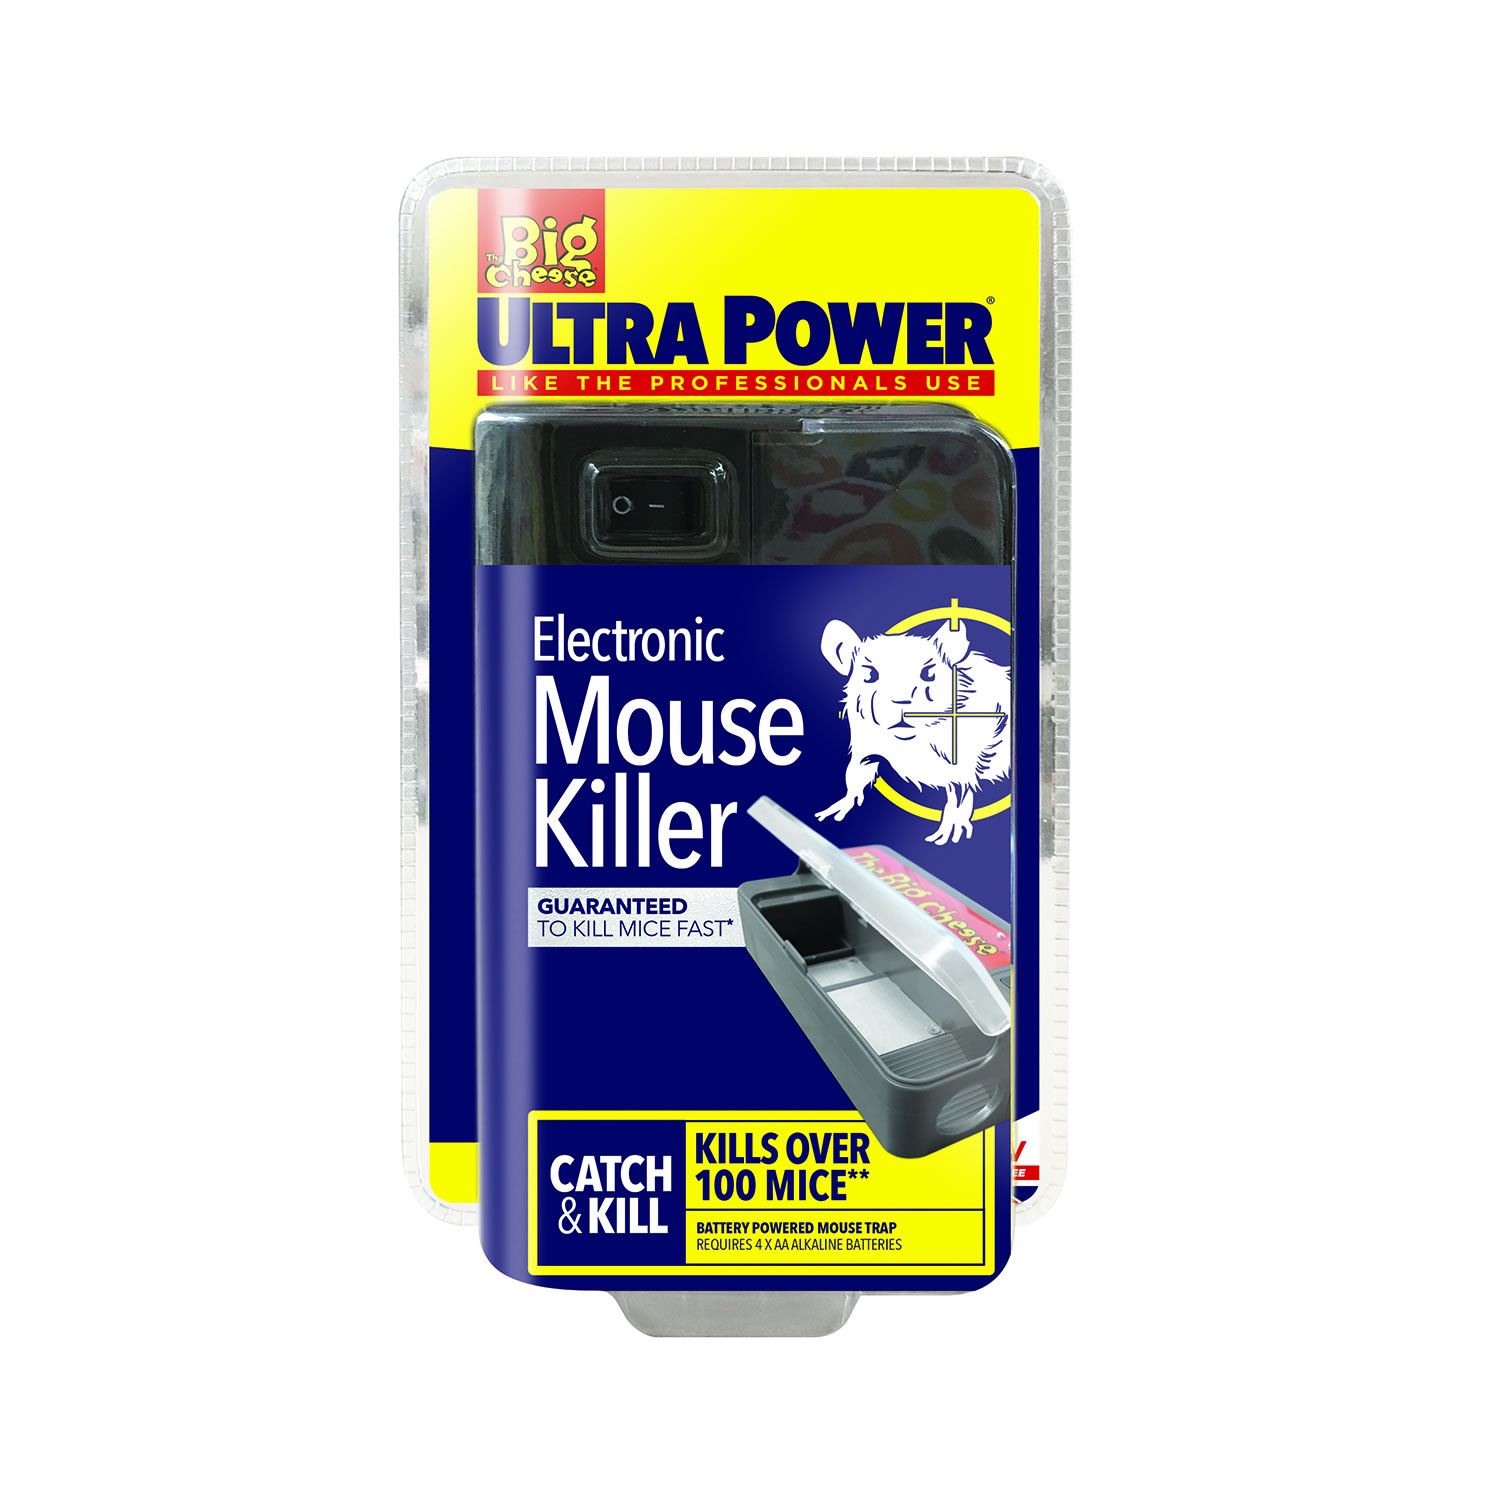 THE BIG CHEESE ULTRA POWER ELECTRONIC MOUSE KILLER